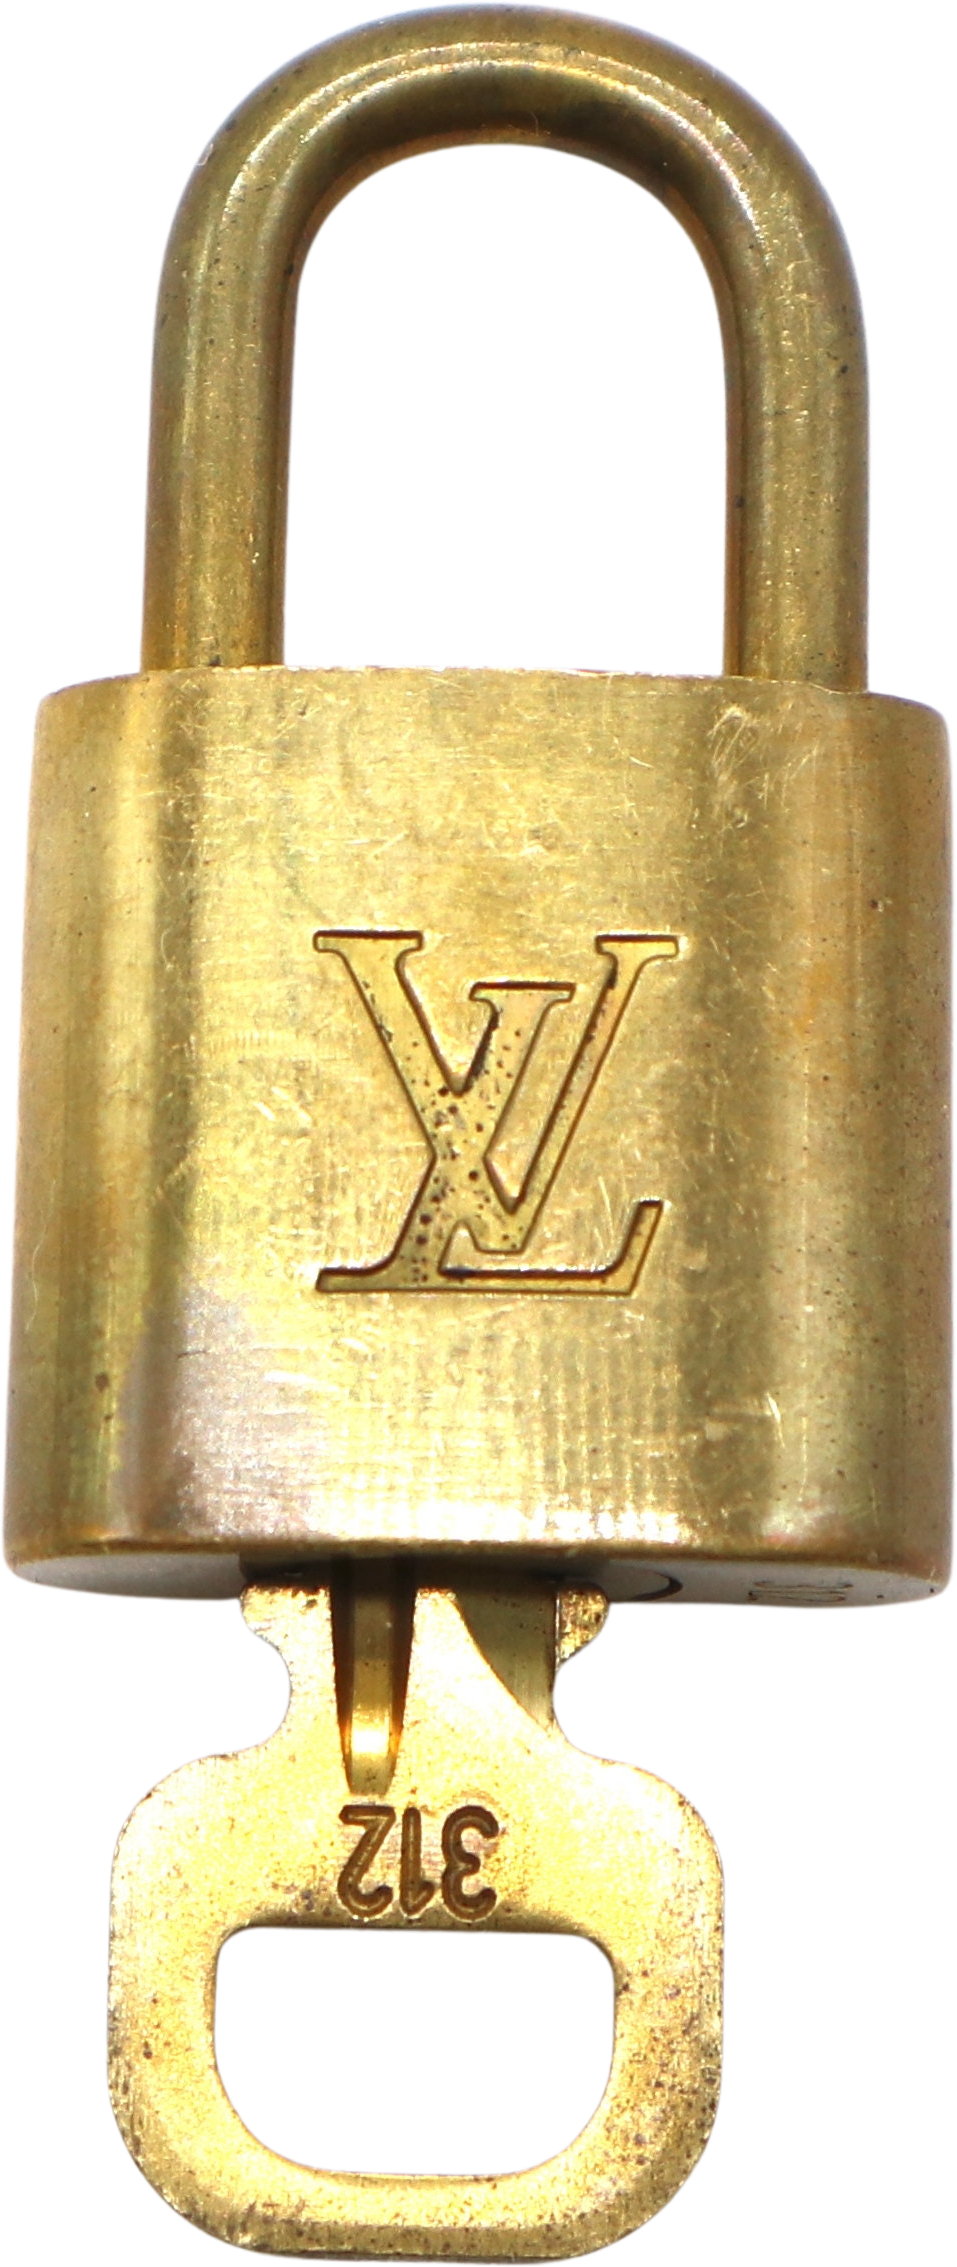 Authentic Louis Vuitton Gold Brass Lock and Key Set 312 